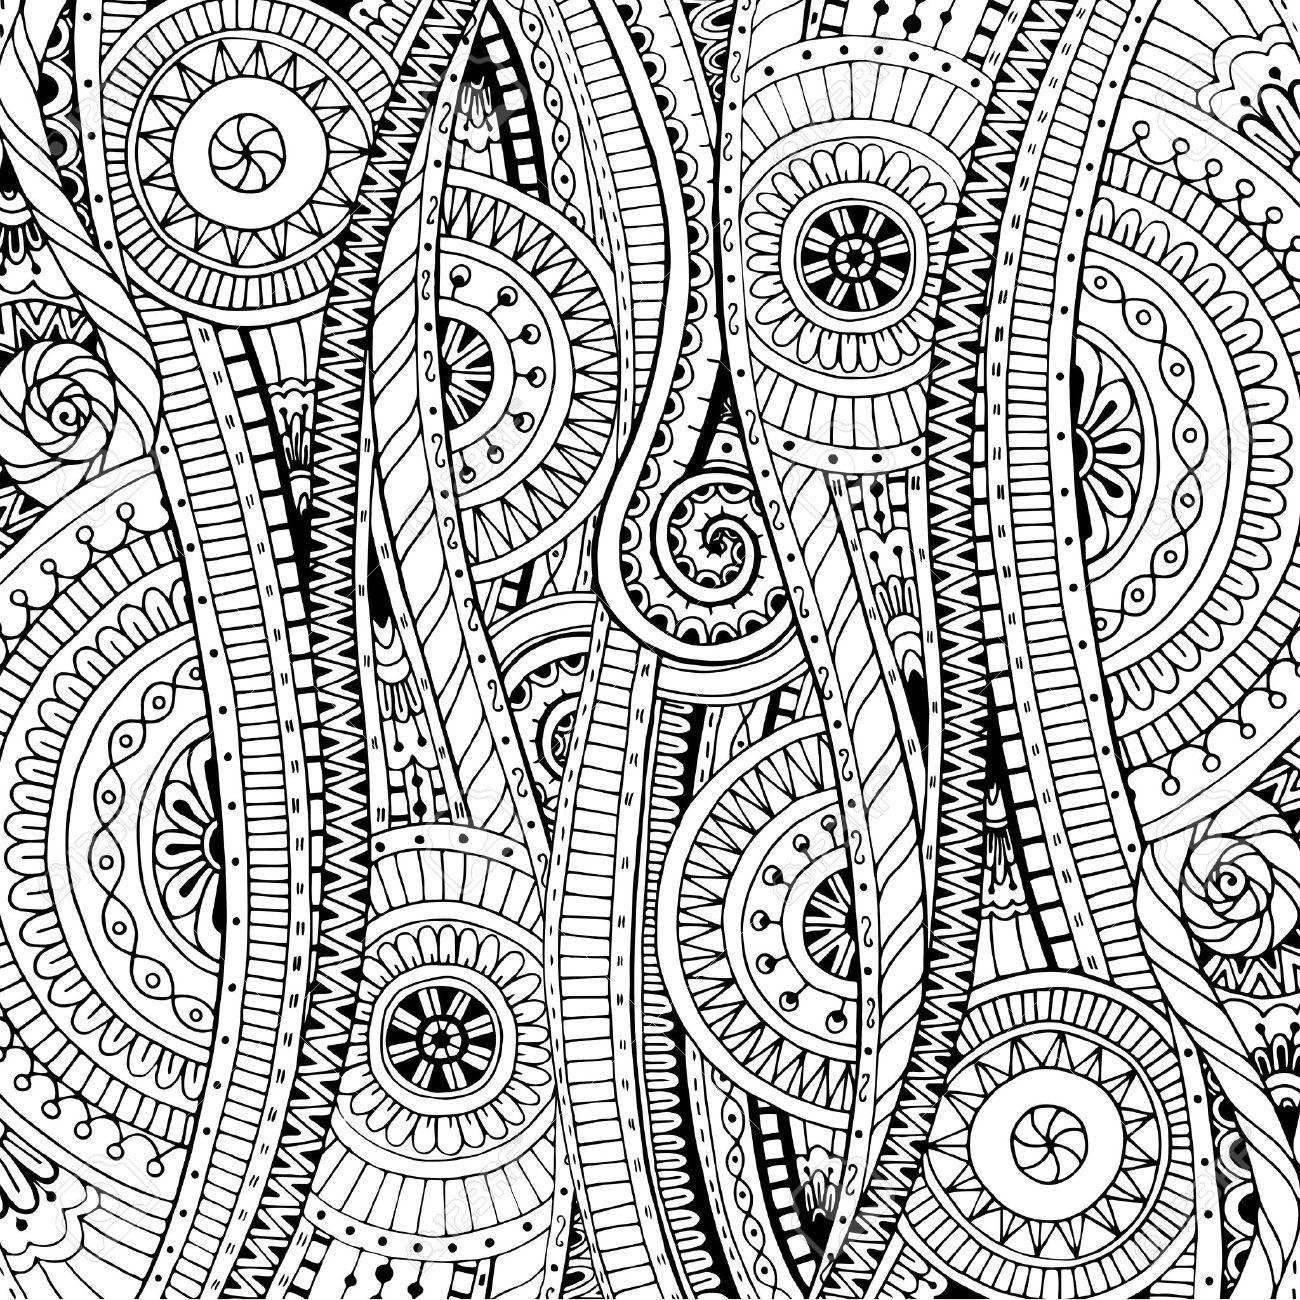 Doodle background in vector with doodles, flowers and paisley. Vector ethnic pattern can be Background In Vector With Doodles, Flowers And Paisley